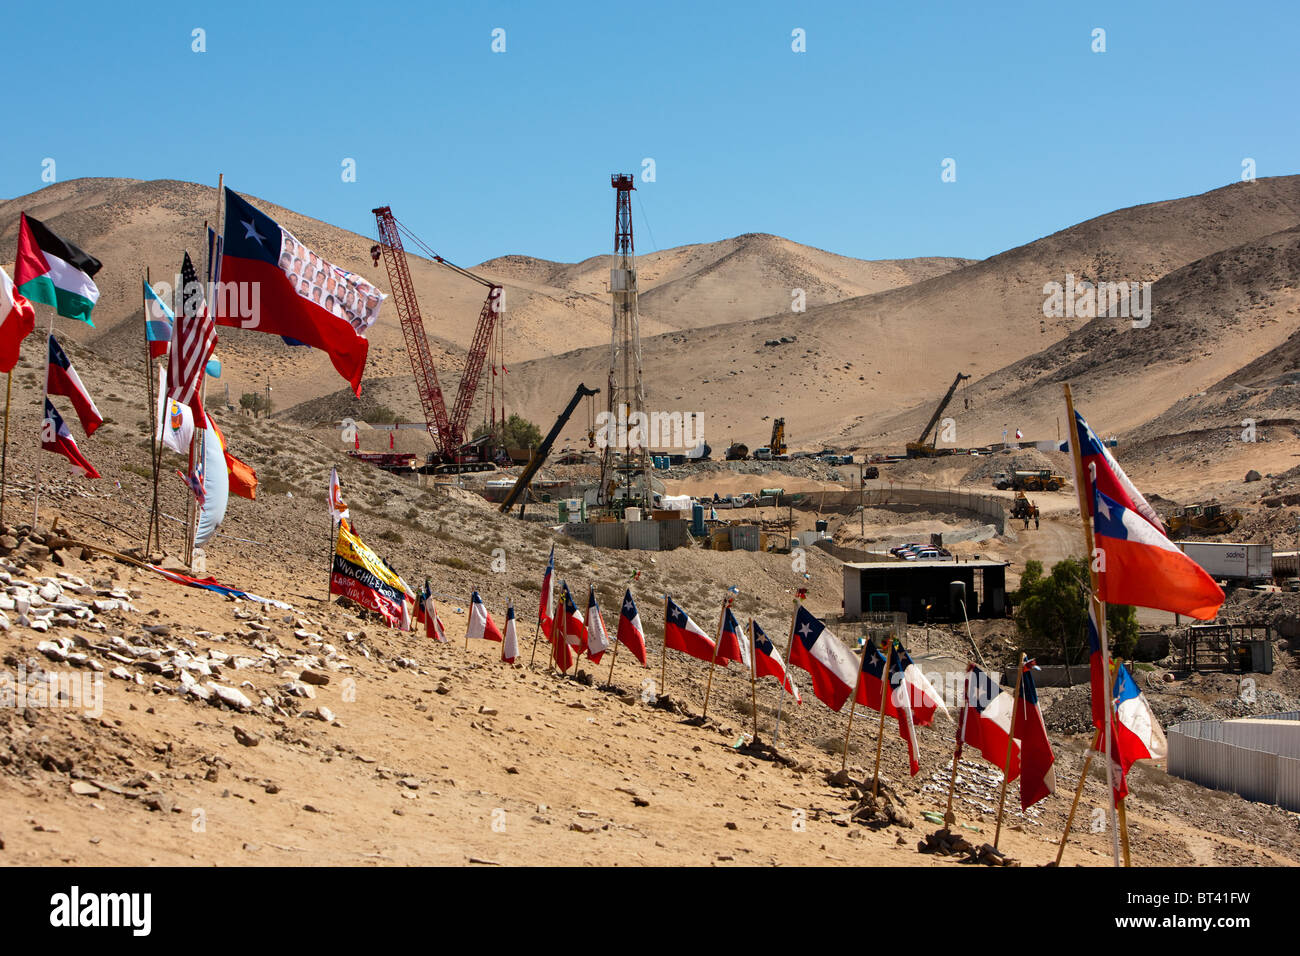 Copiapo, Chile San Jose Mine Plan C Drilling Rig  Flags of Hope copy space Chilean rescue attempt for trapped miners Stock Photo